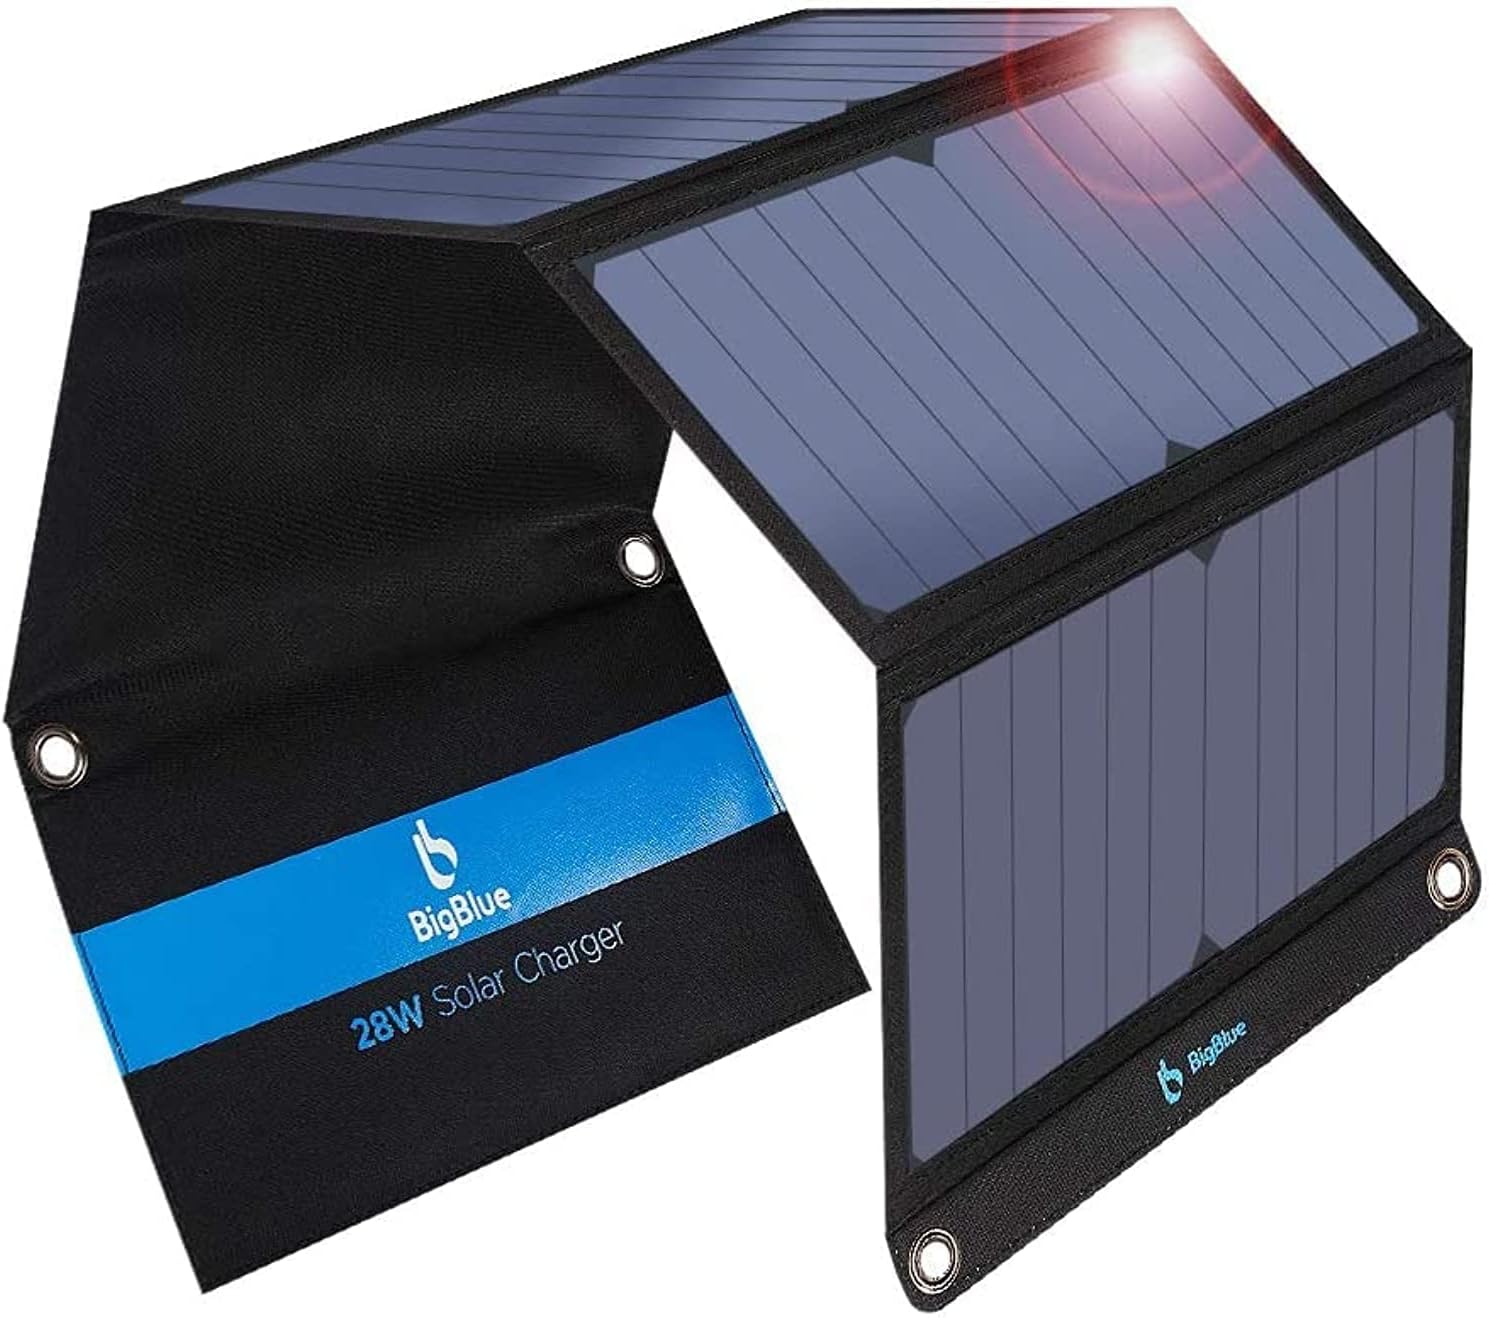 #1 Best BigBlue Solar Charger Review